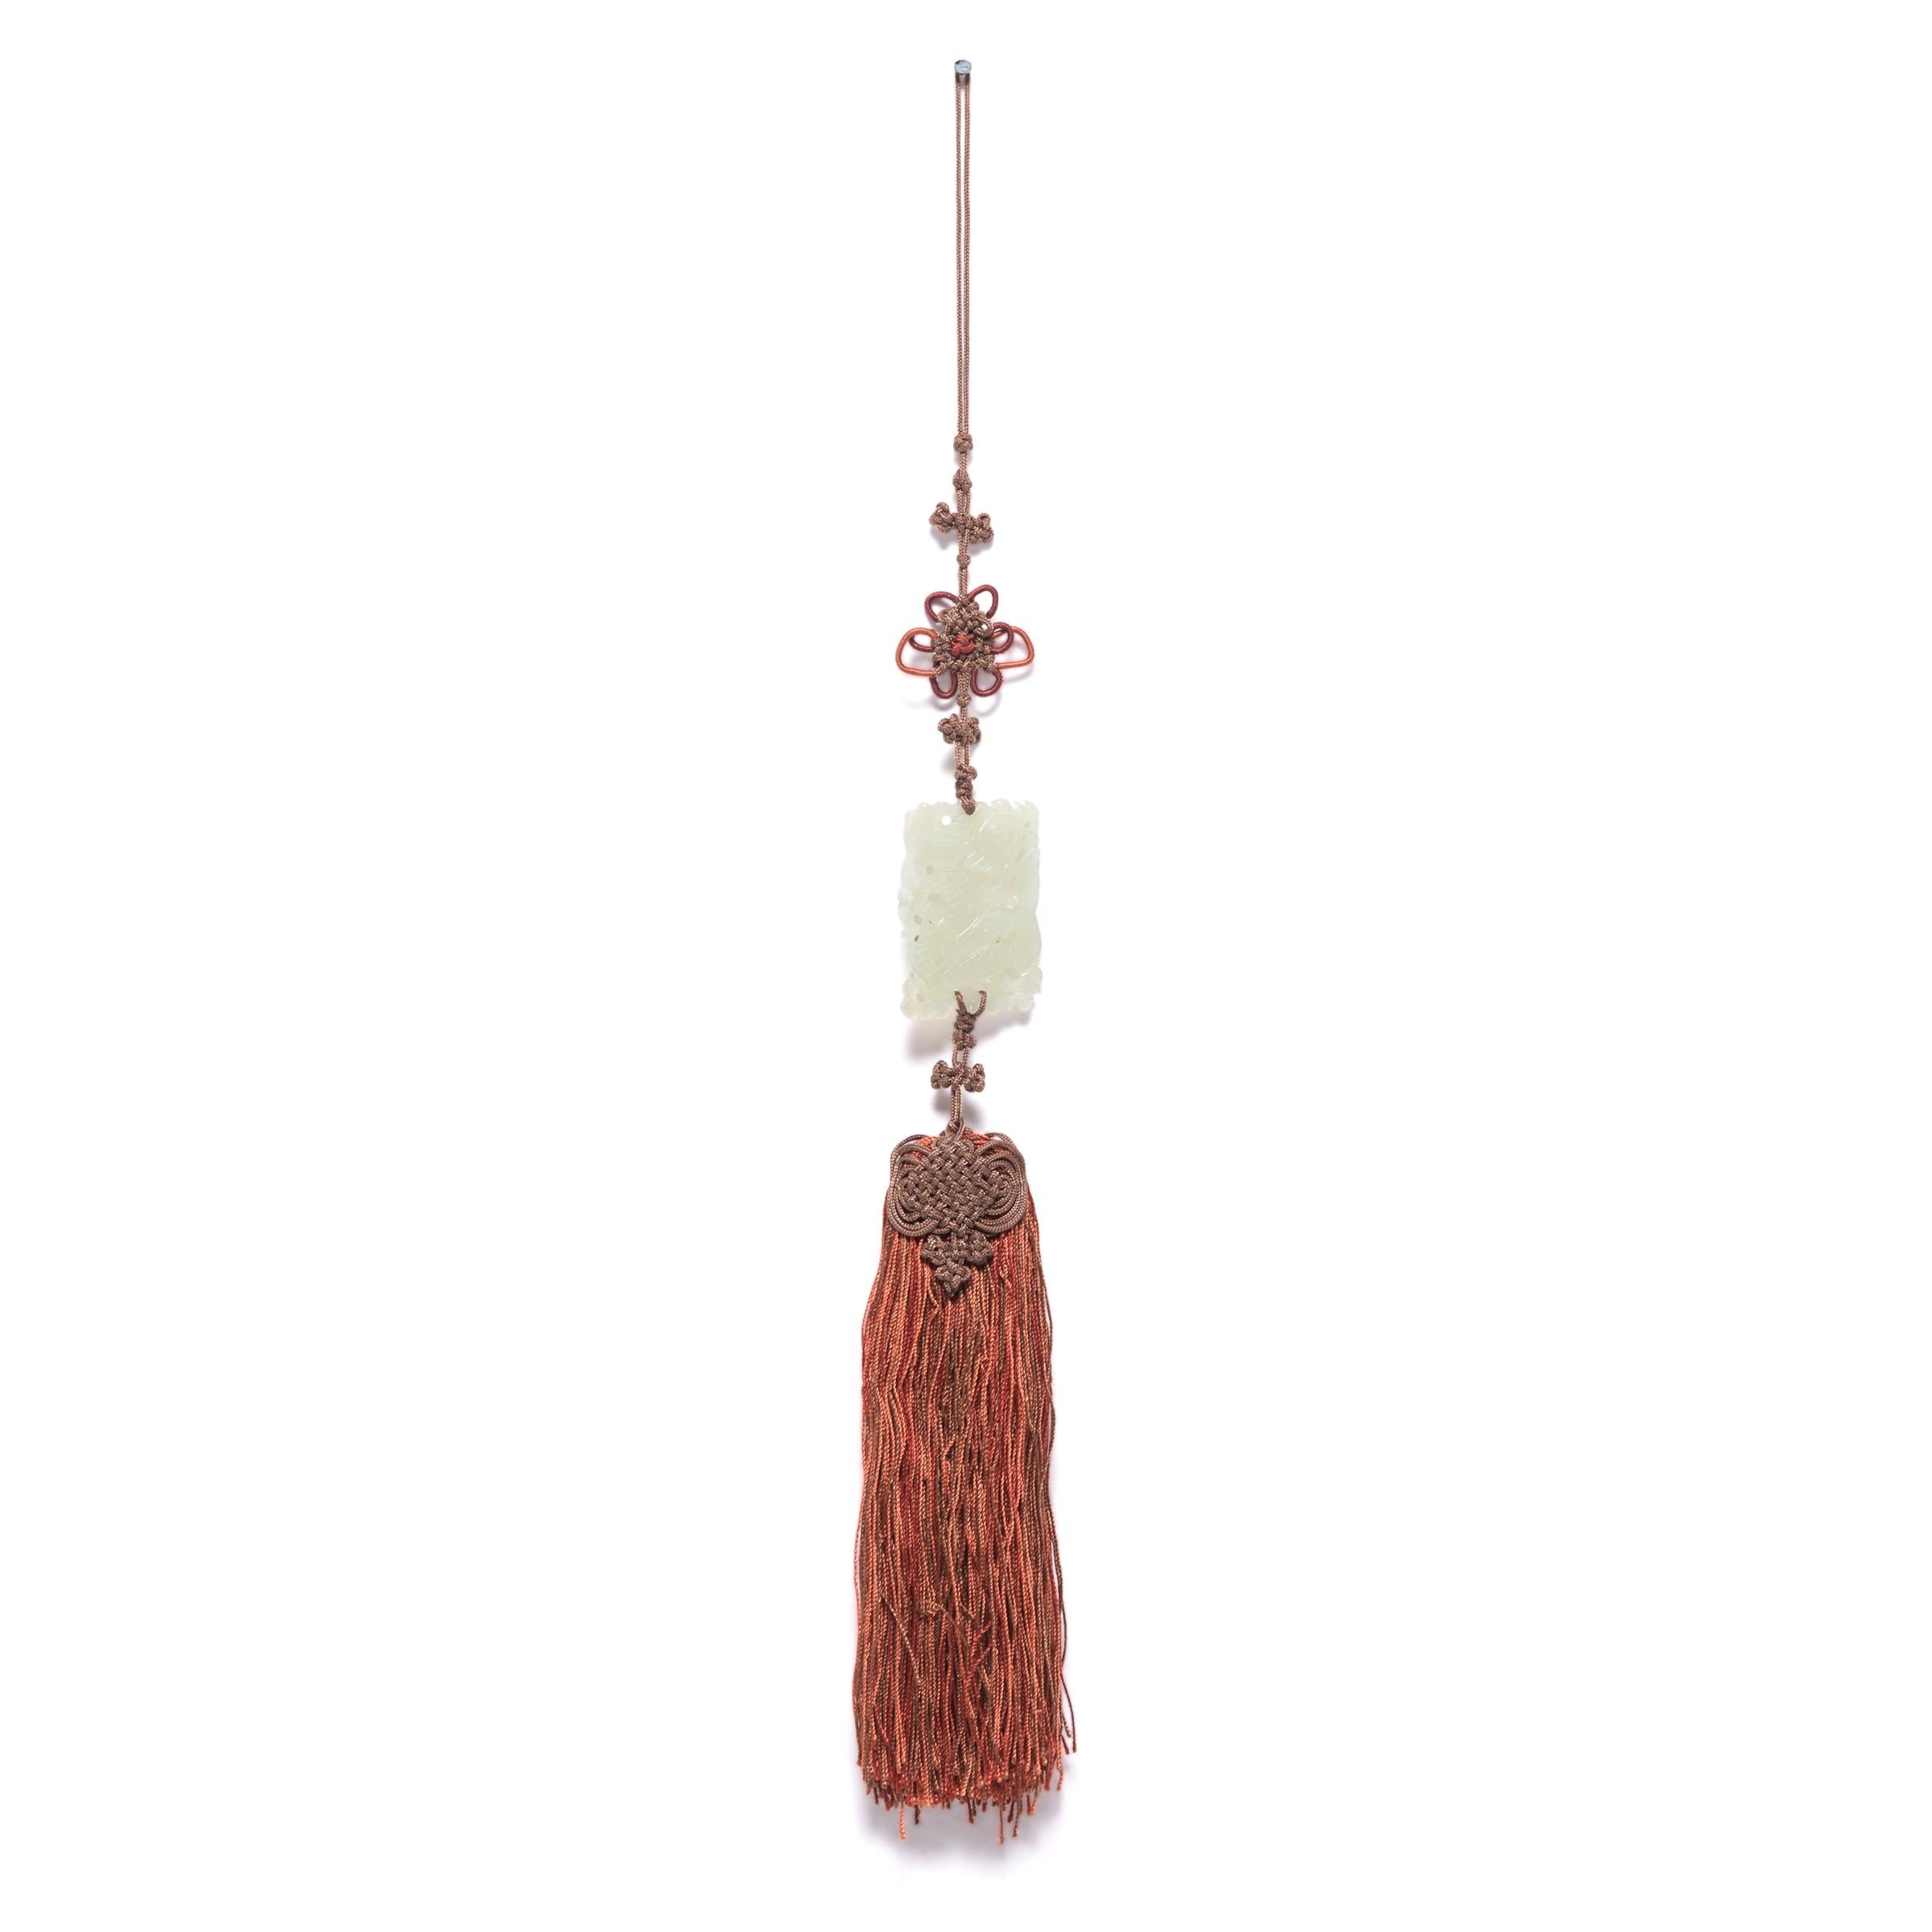 A Chinese knot is tied from a single length of cord carefully woven into a variety of complex shapes, the knots end in tassels, which are used to add elegance to everyday items like hairpins or lanterns. This handmade orange silk tassel is knotted